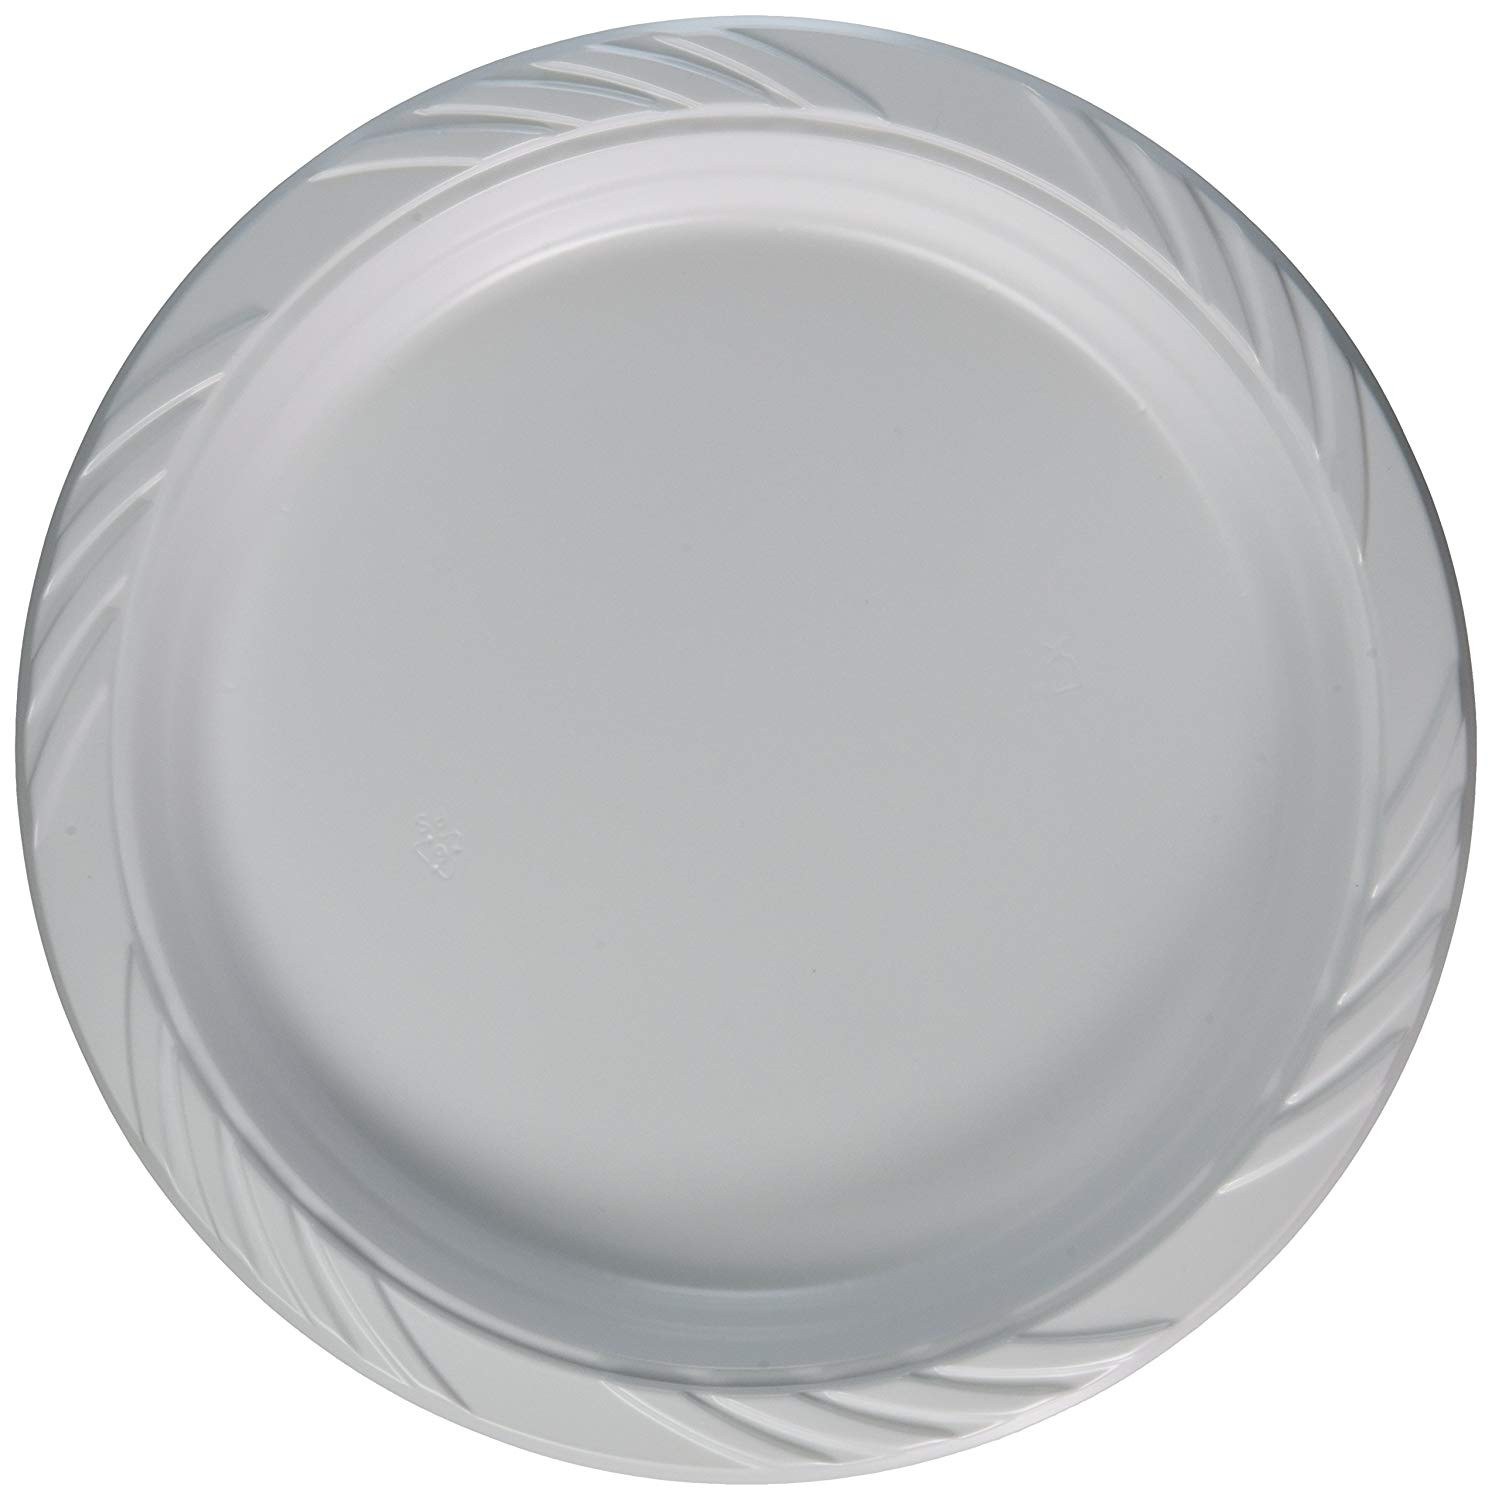 Plastic Dinner Plates
 100 White Plastic Party Plates 9" Clean Dinner Disposable